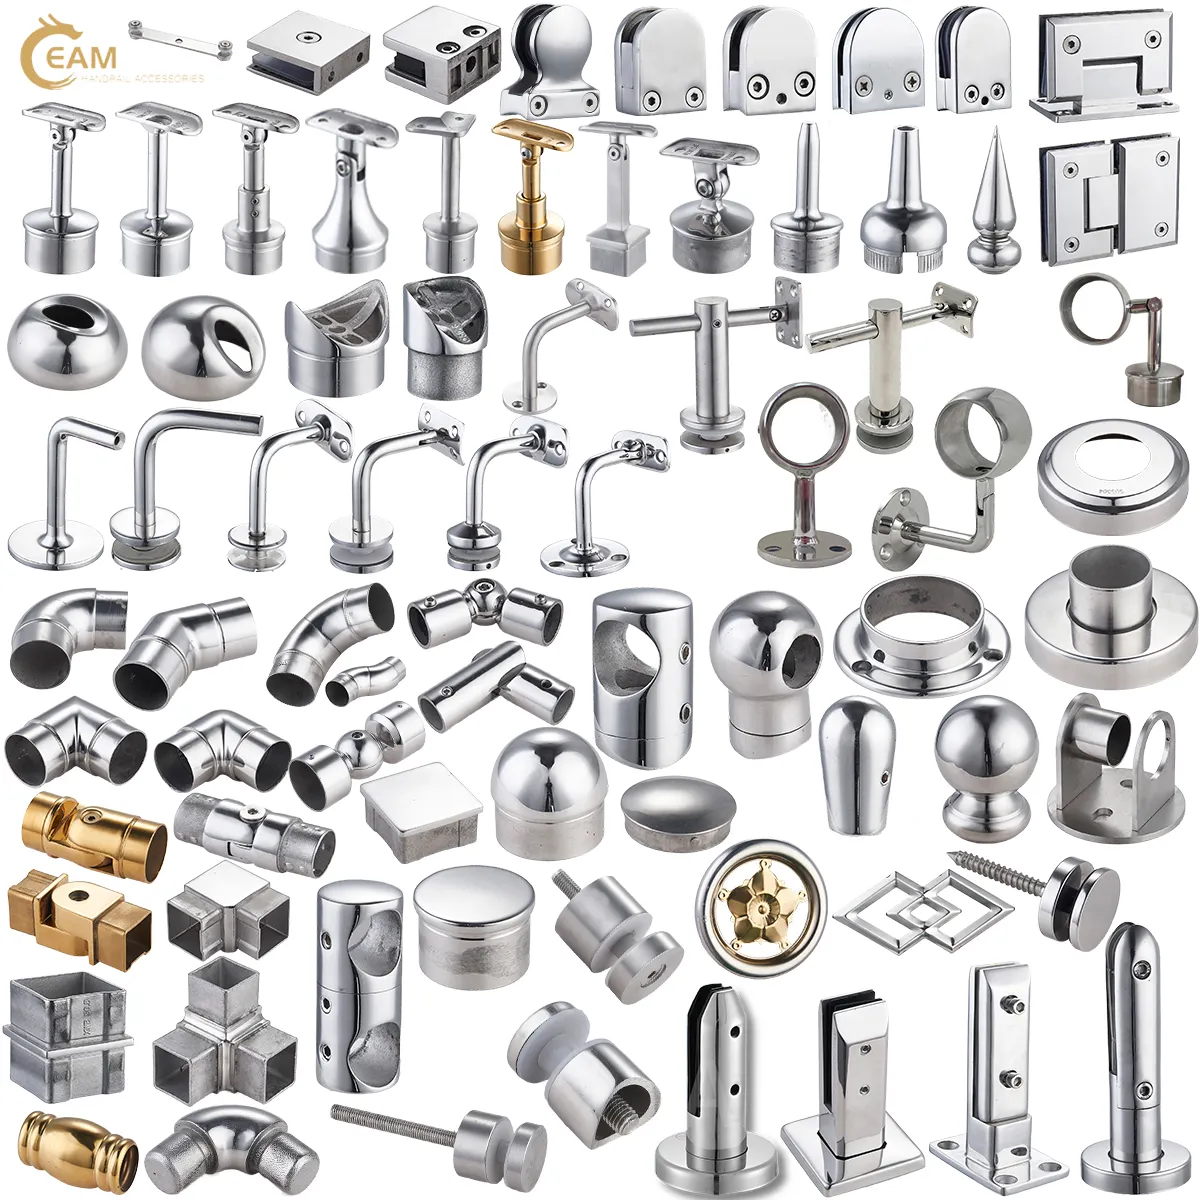 SS 304 316 Stainless Steel Glass Fittings Glass Balustrade Clamp Balcony Glass Railing Clamps Clip Handrail Accessories